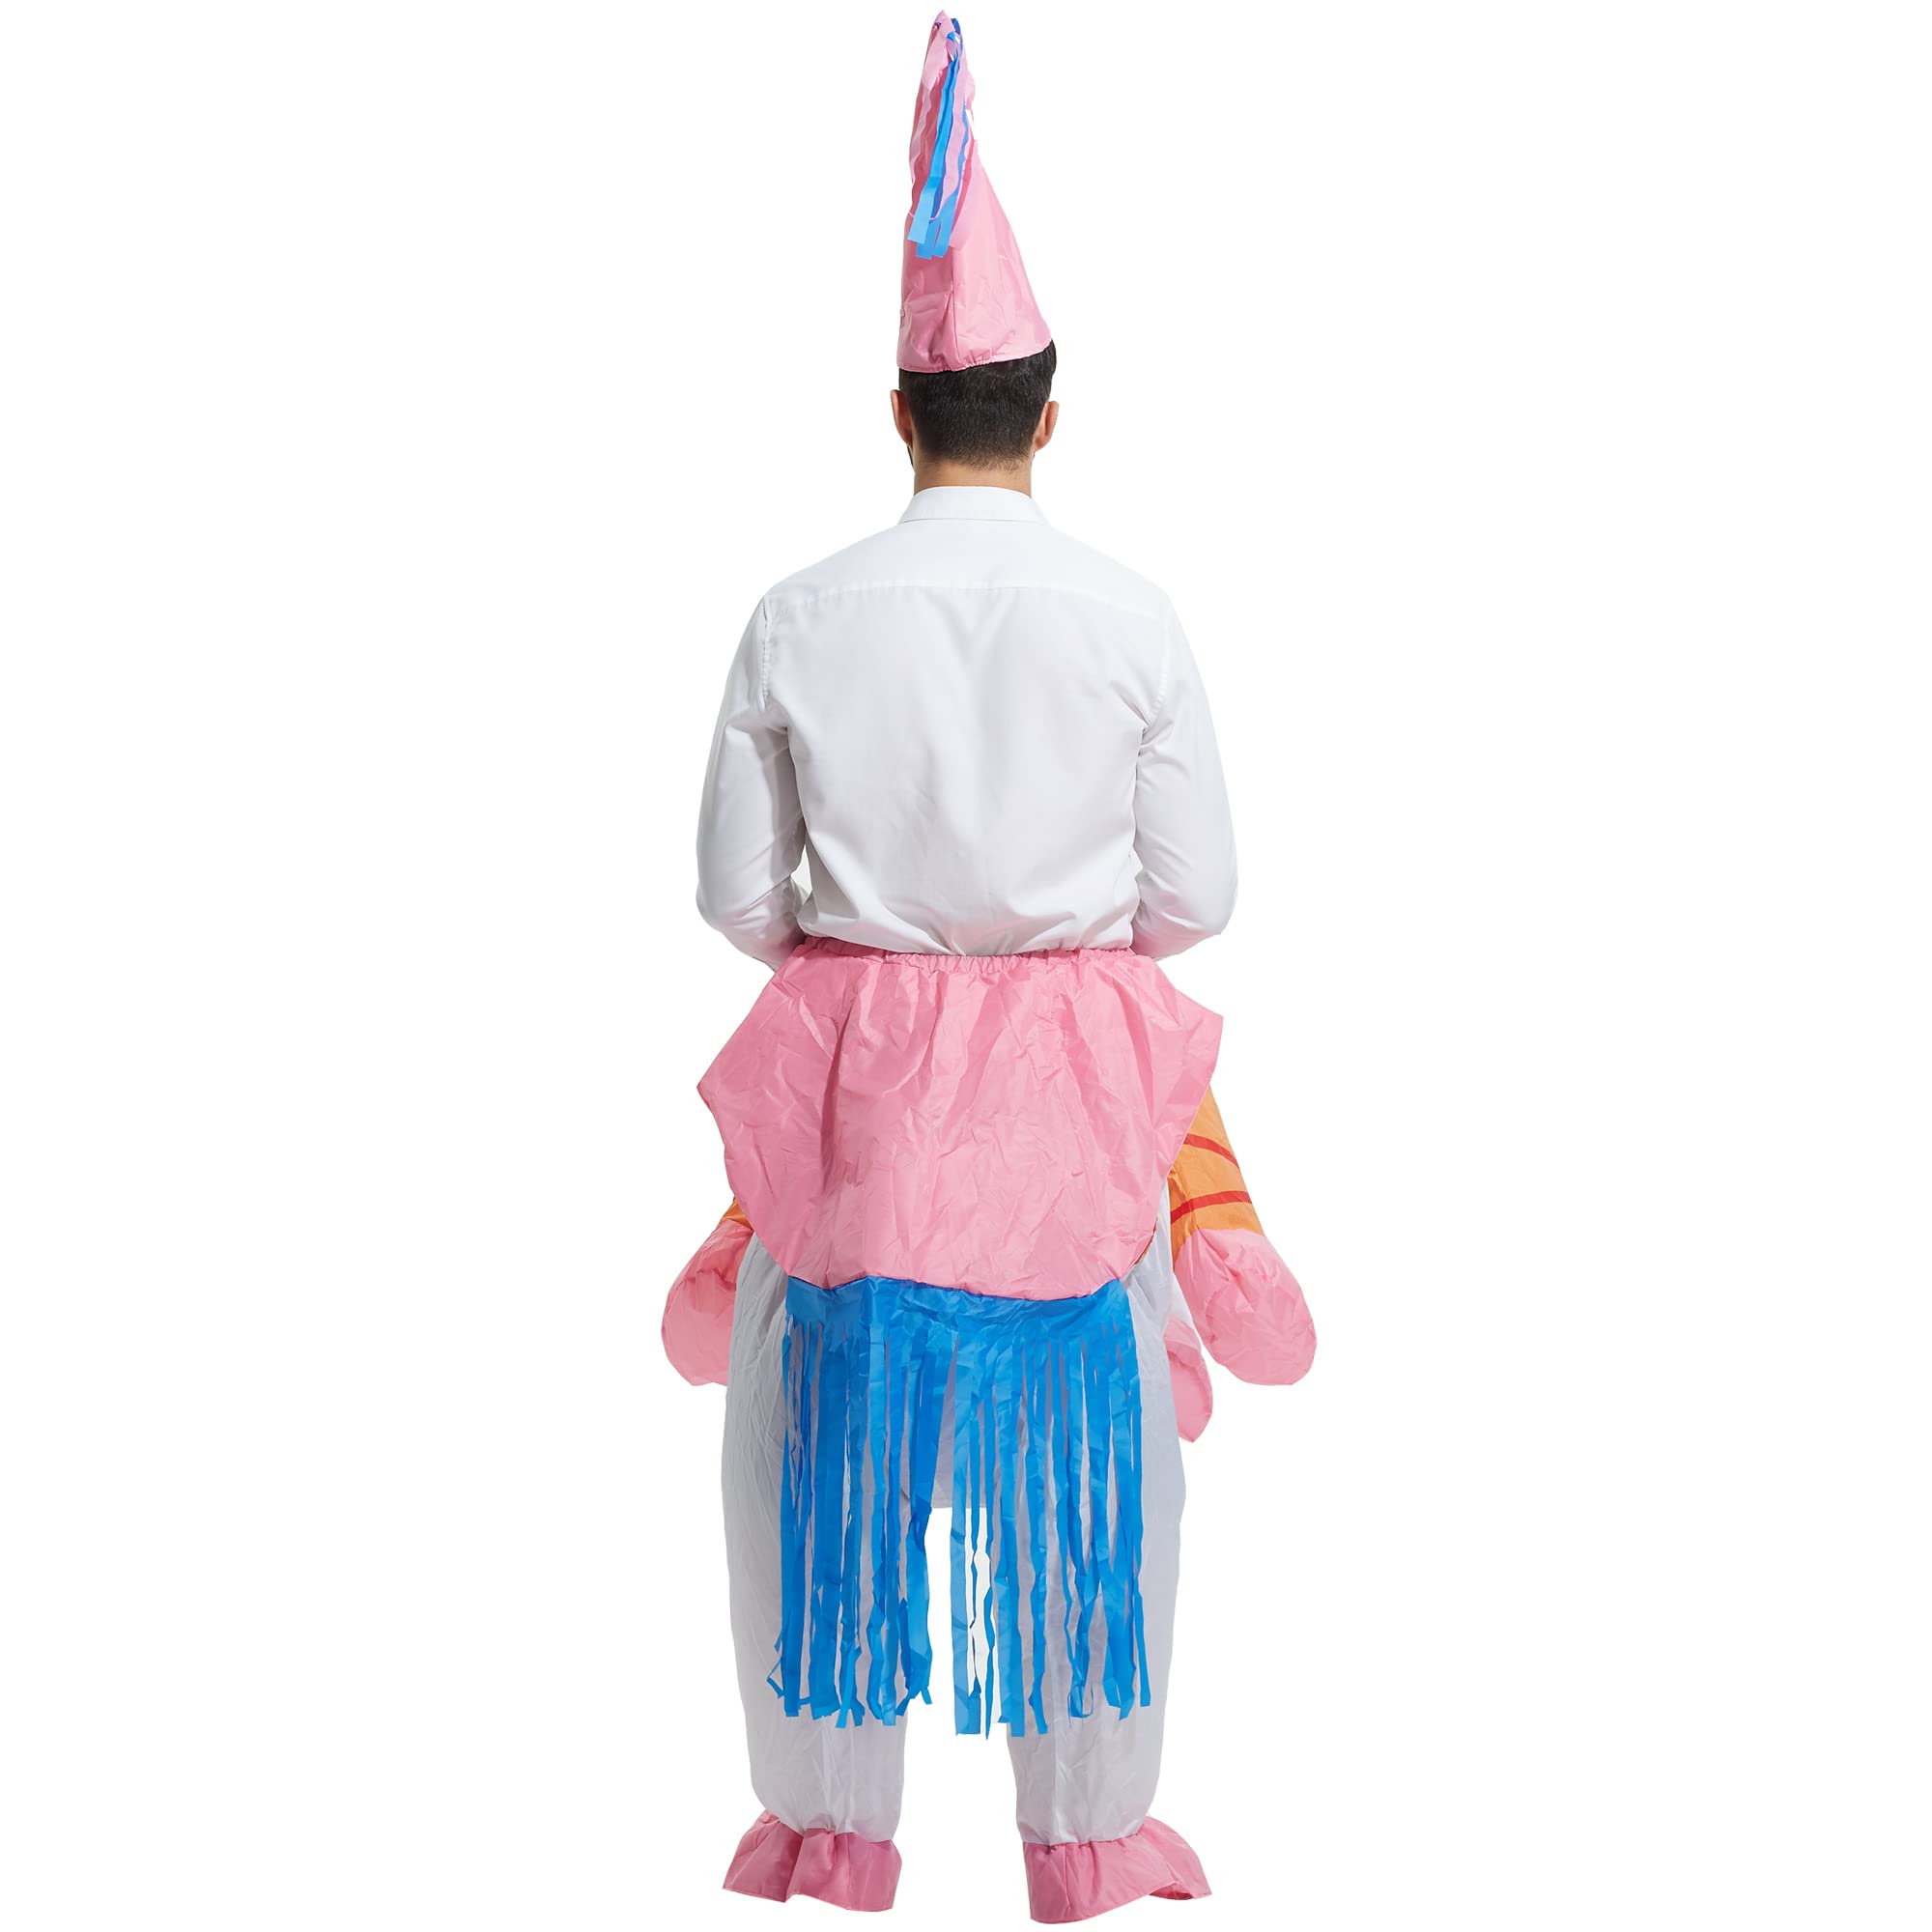 TOLOCO Inflatable Costume for Adults, Blow up Costume, Men Halloween Costume, Inflatable Unicorn Costume for Adult